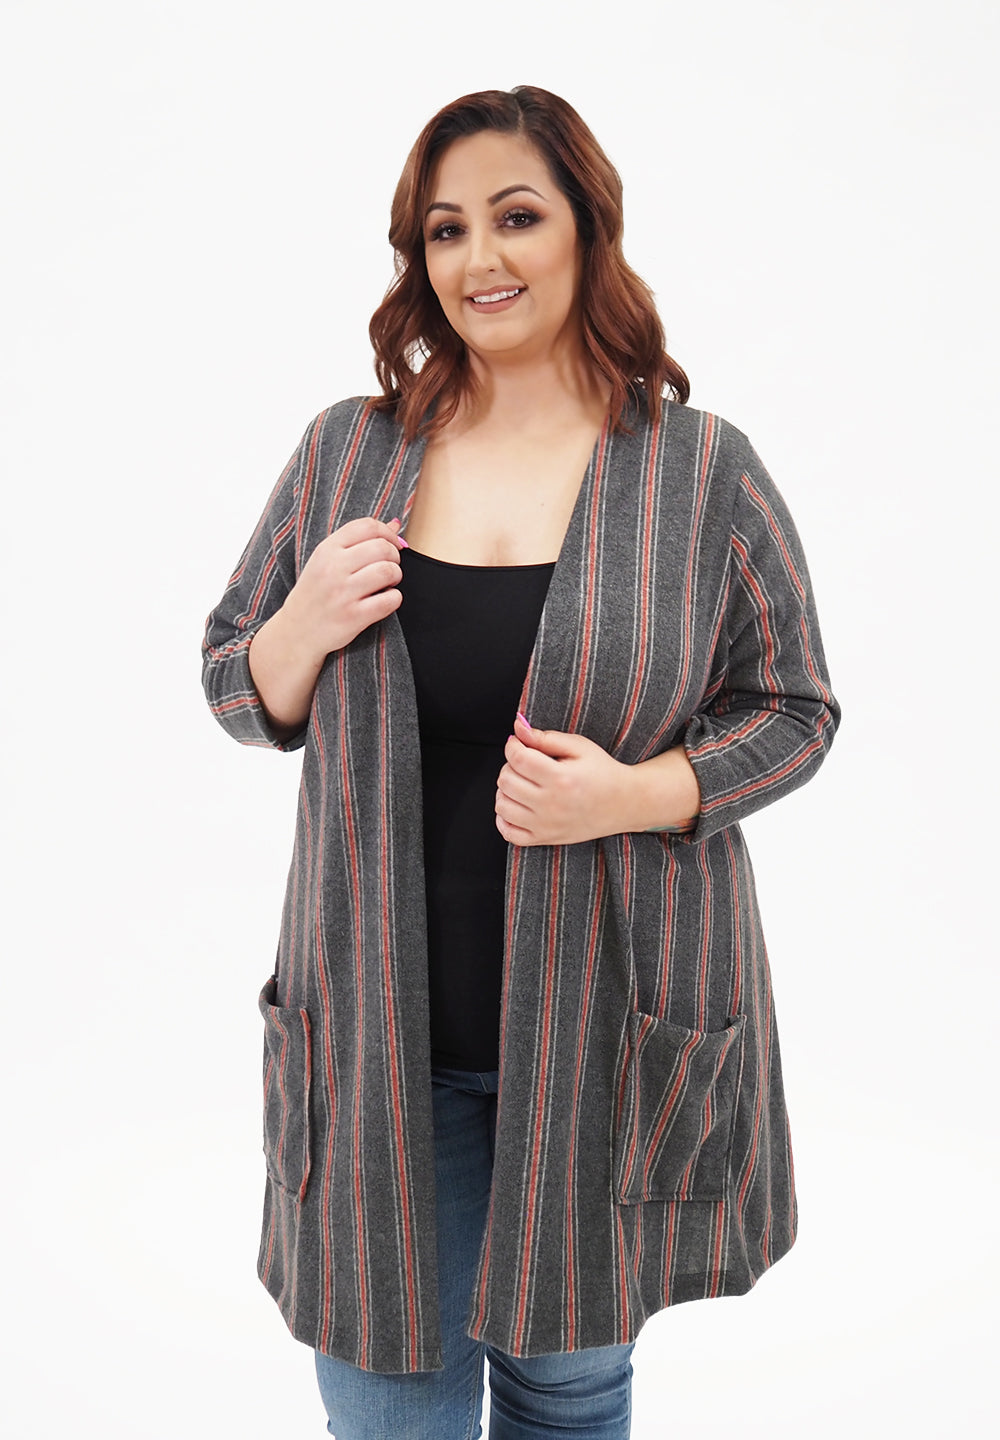 Affordable Plus Size Tops | SWAK Designs Plus Size Clothing Collection